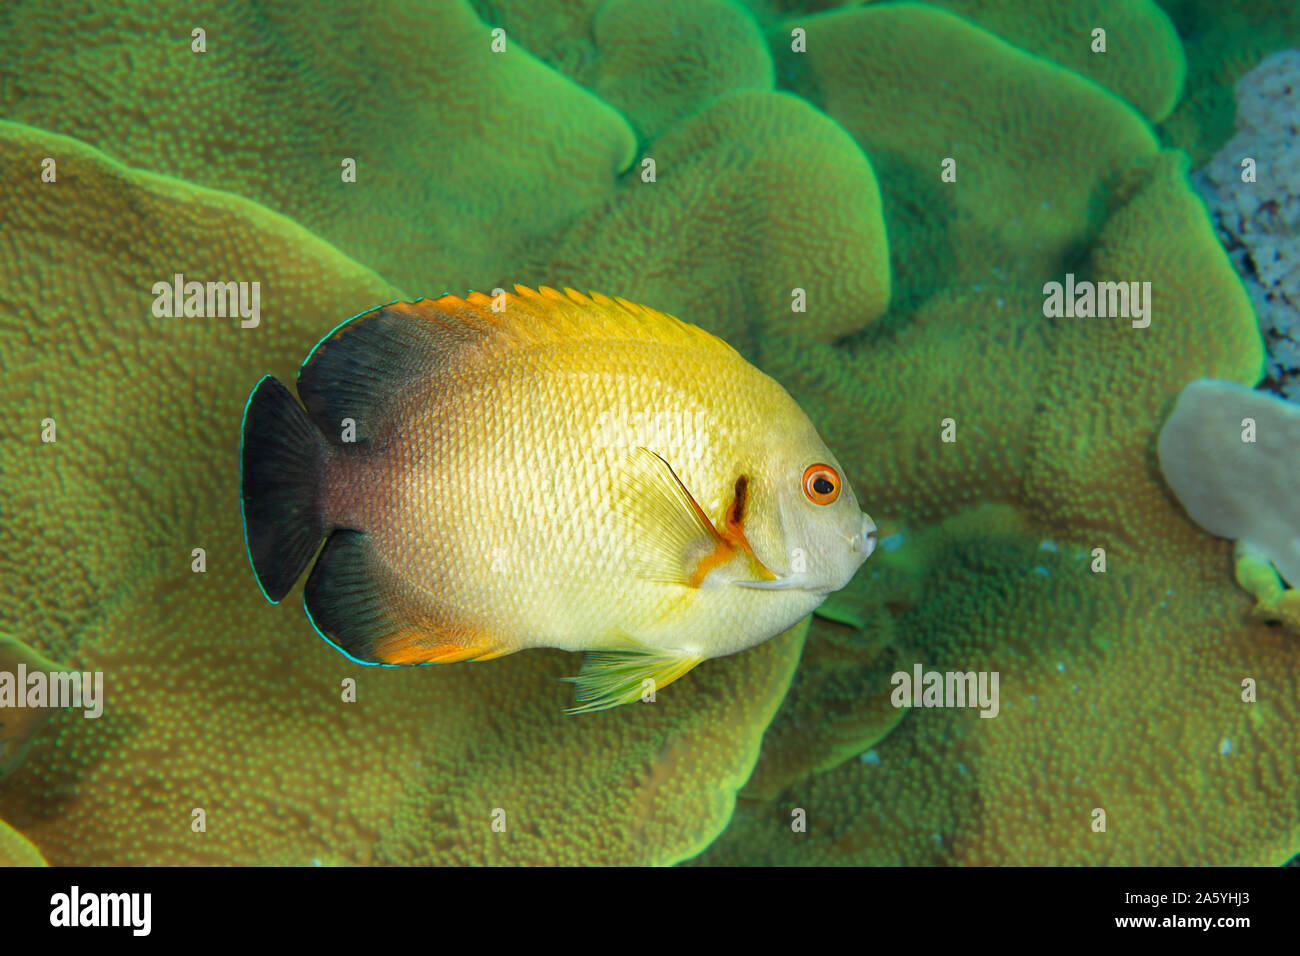 A pearlscale angelfish or half black angelfish, Centropyge vrolikii, on a reef off the island of Yap, Micronesia. Stock Photo